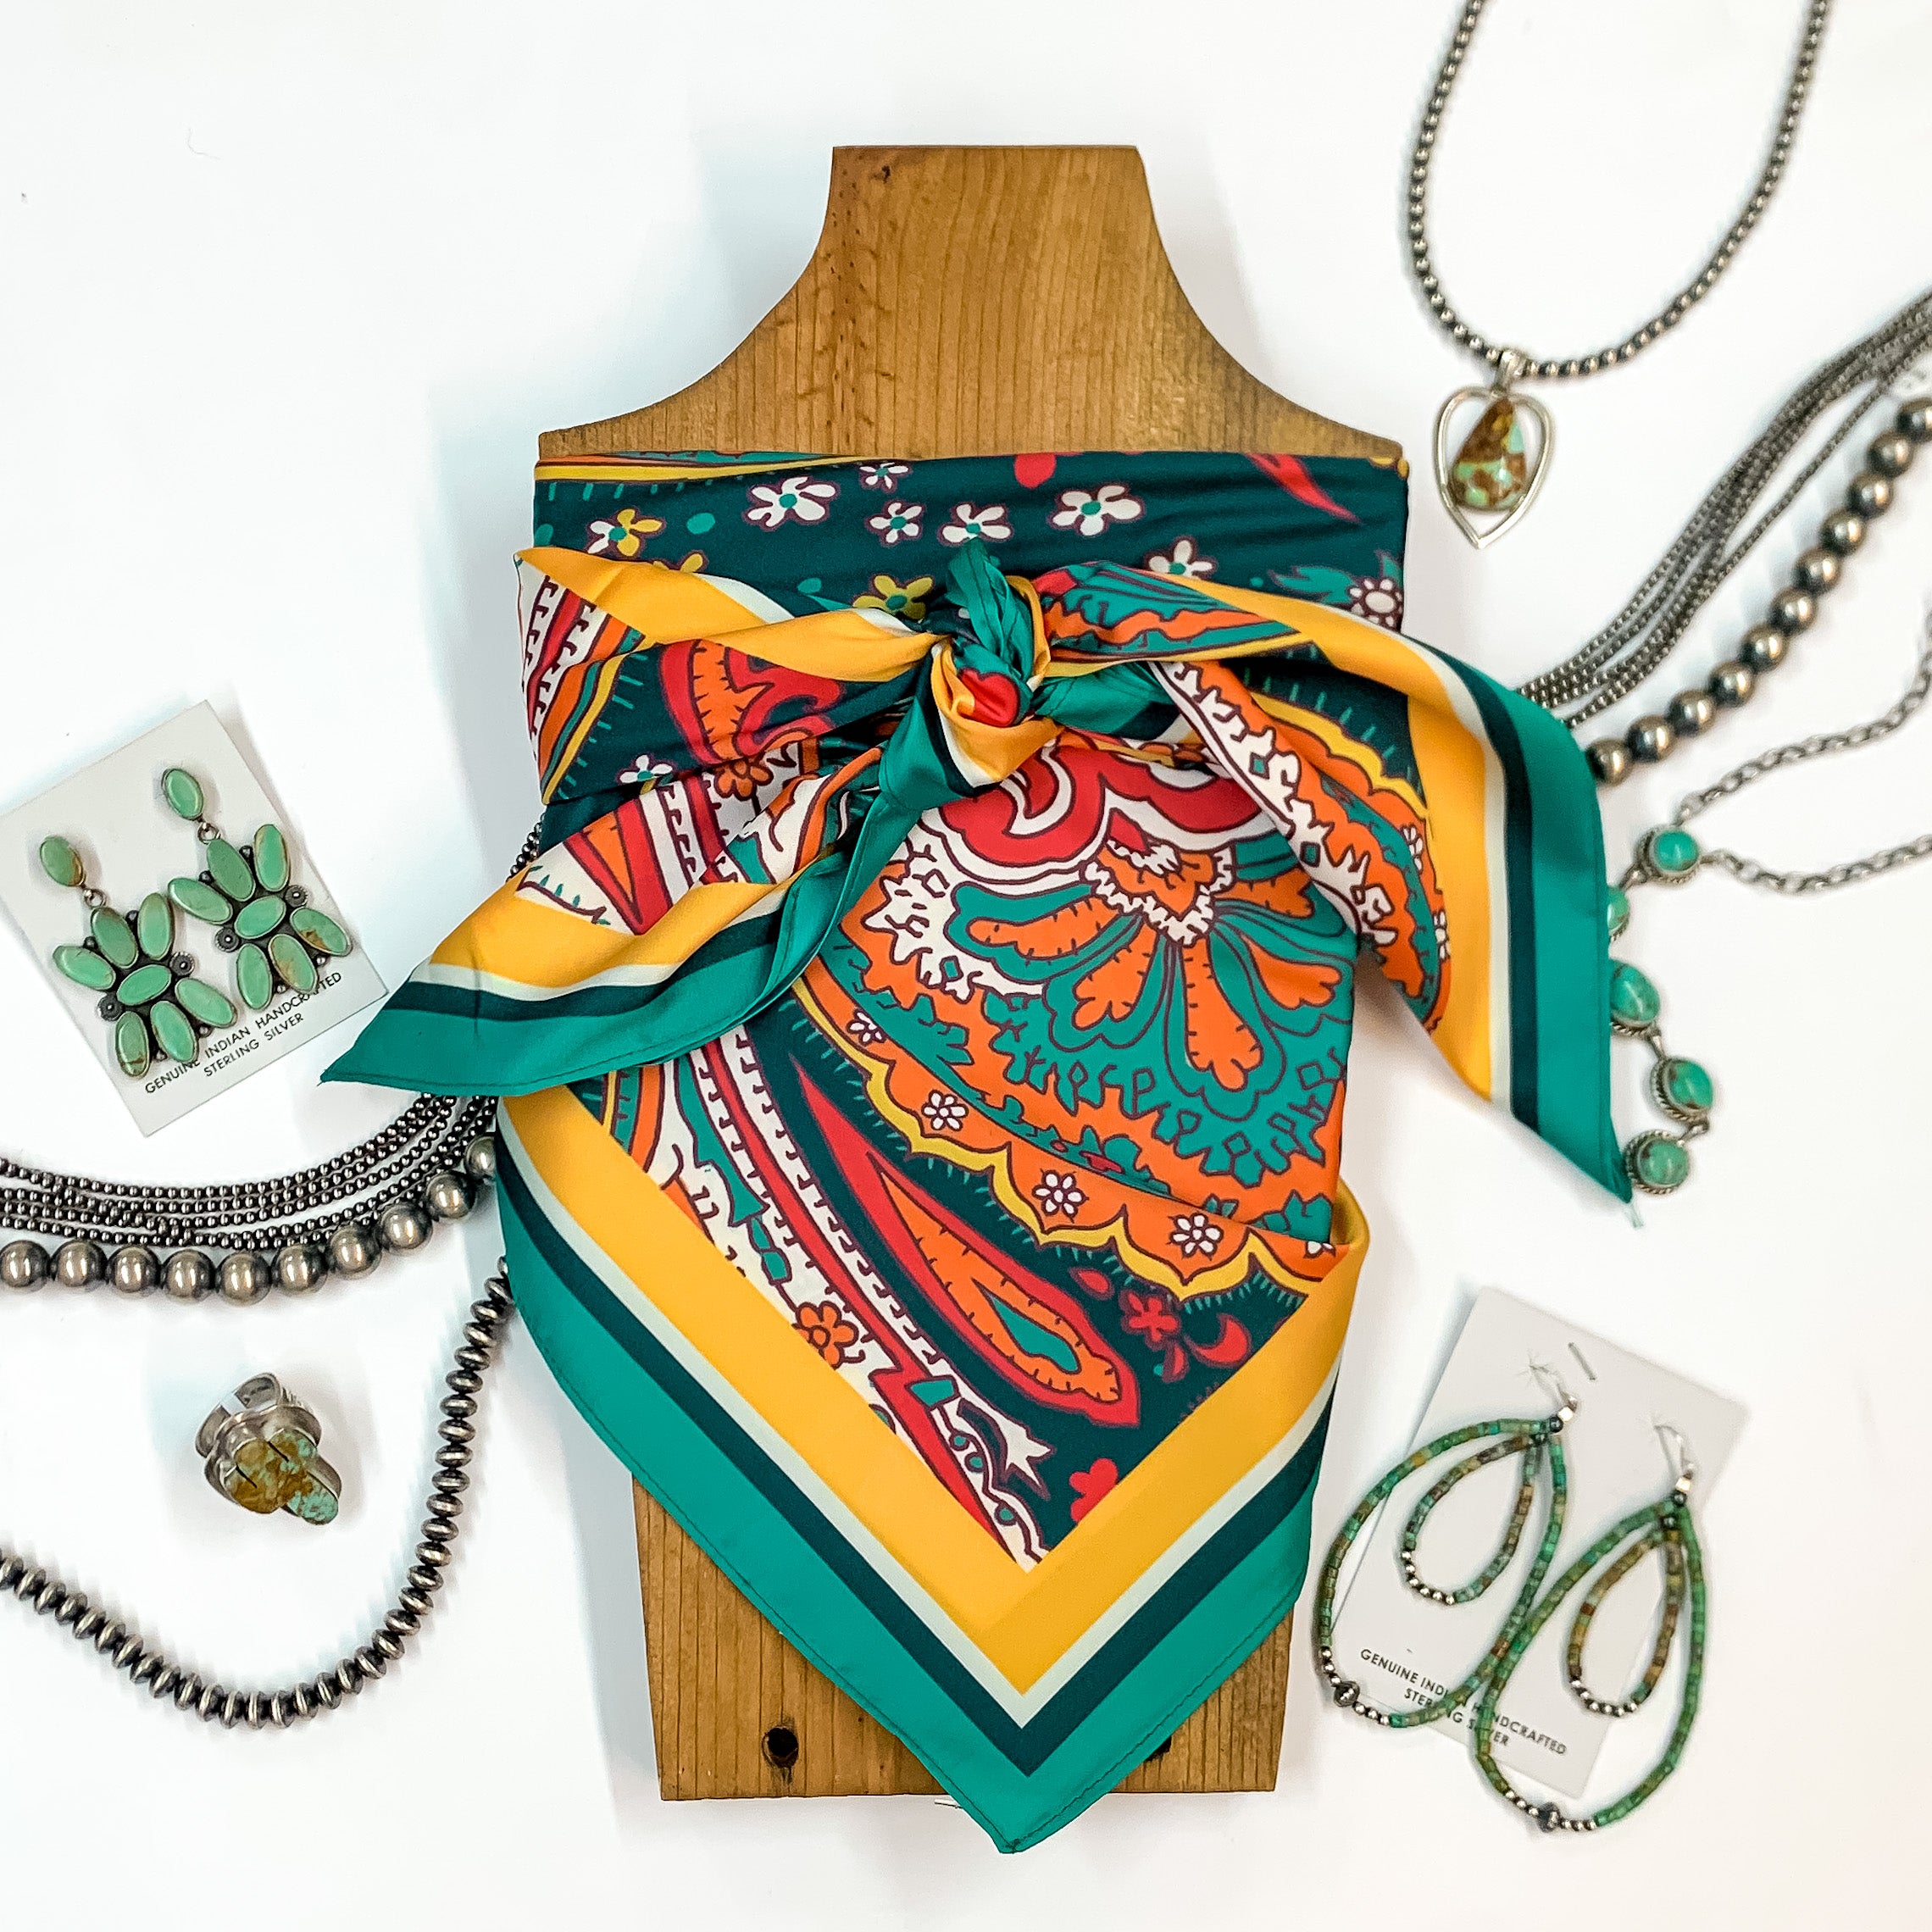 Patterned scarf in Payson Paisley. Scarf is tied around a wooden piece. The scarf and piece of wood is pictured on a white background with Navajo jewelry spread out around it.